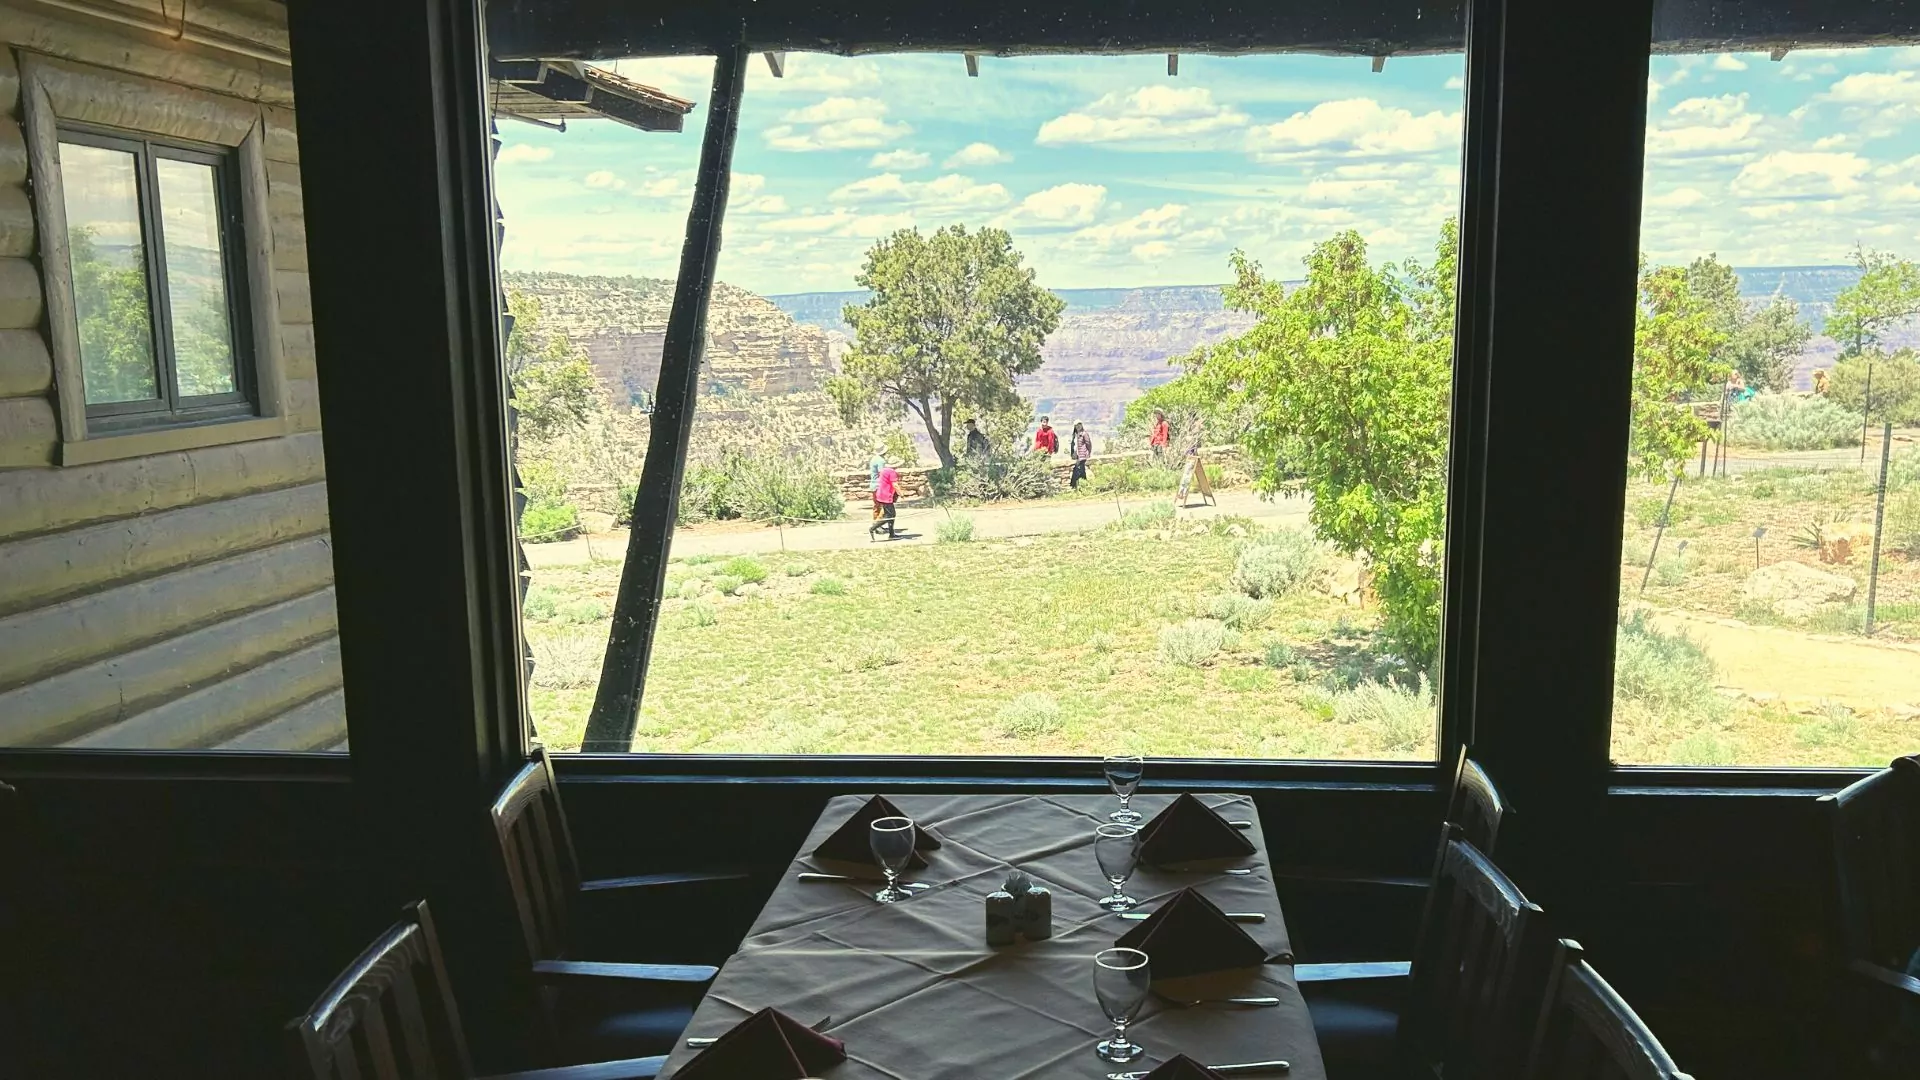 A set dinner table next to a large window looks out on the edge of the Grand Canyon